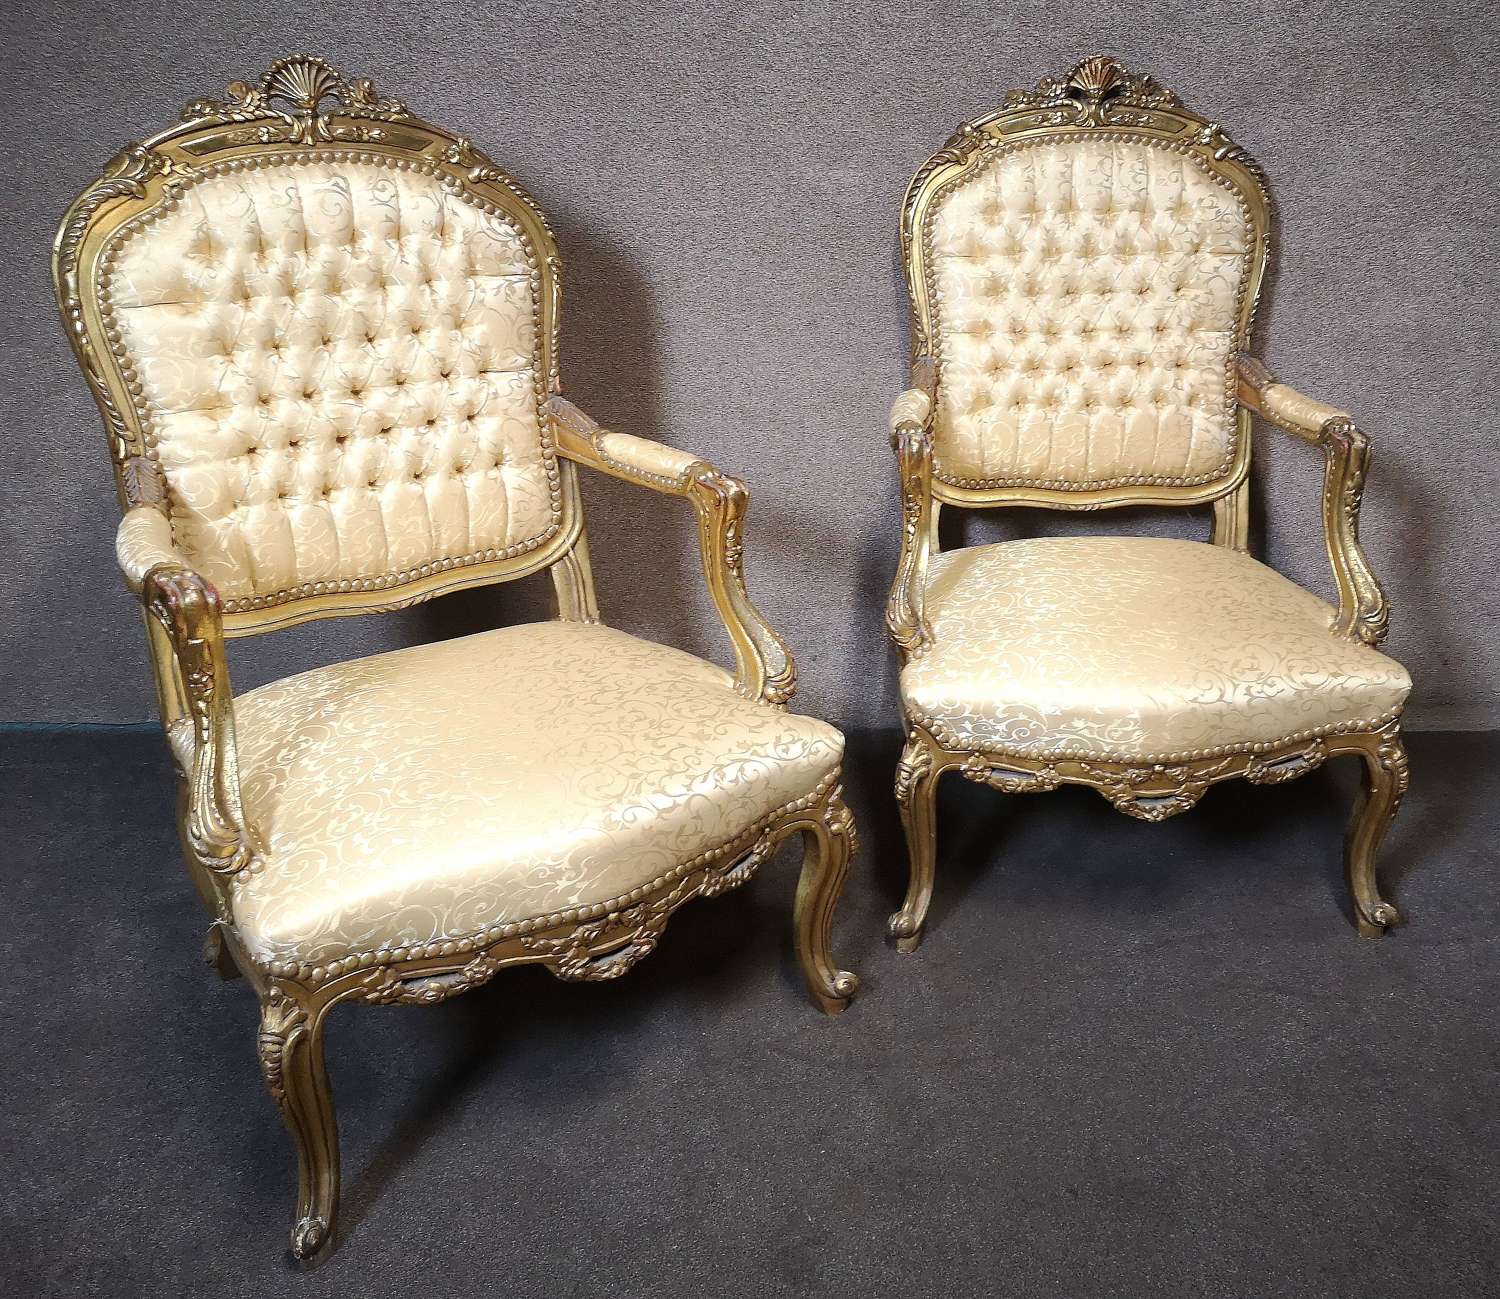 Large Pair of Gilt Wood Arm Chairs In The French Louis XV Style